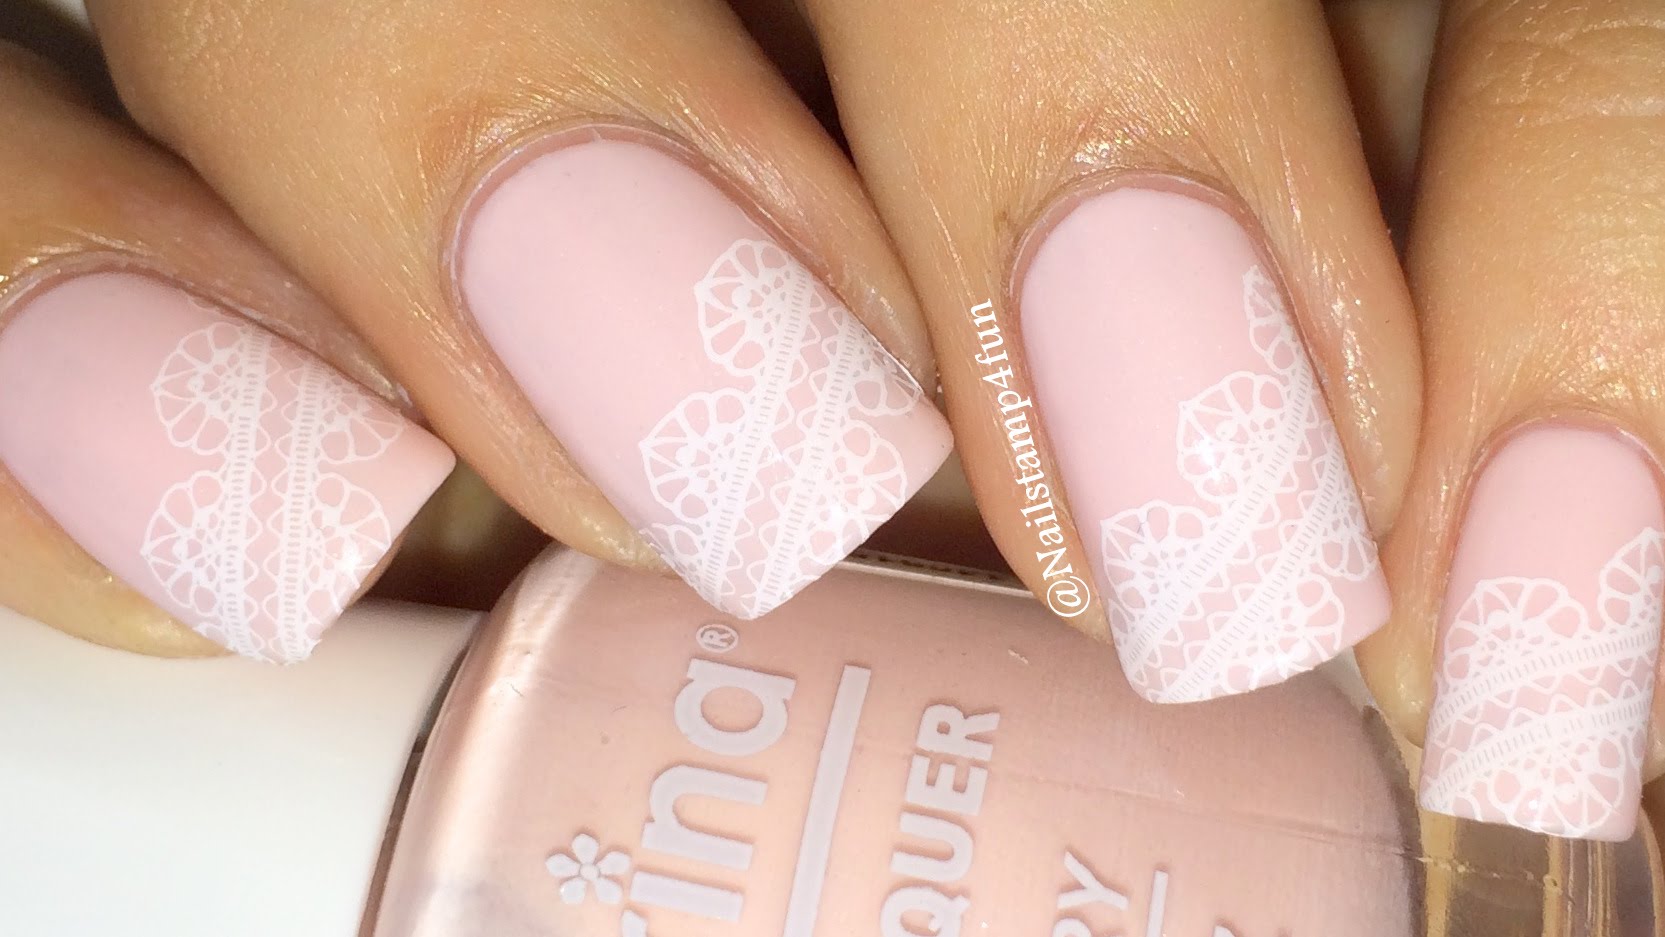 4. Delicate Lace Nail Art - wide 5